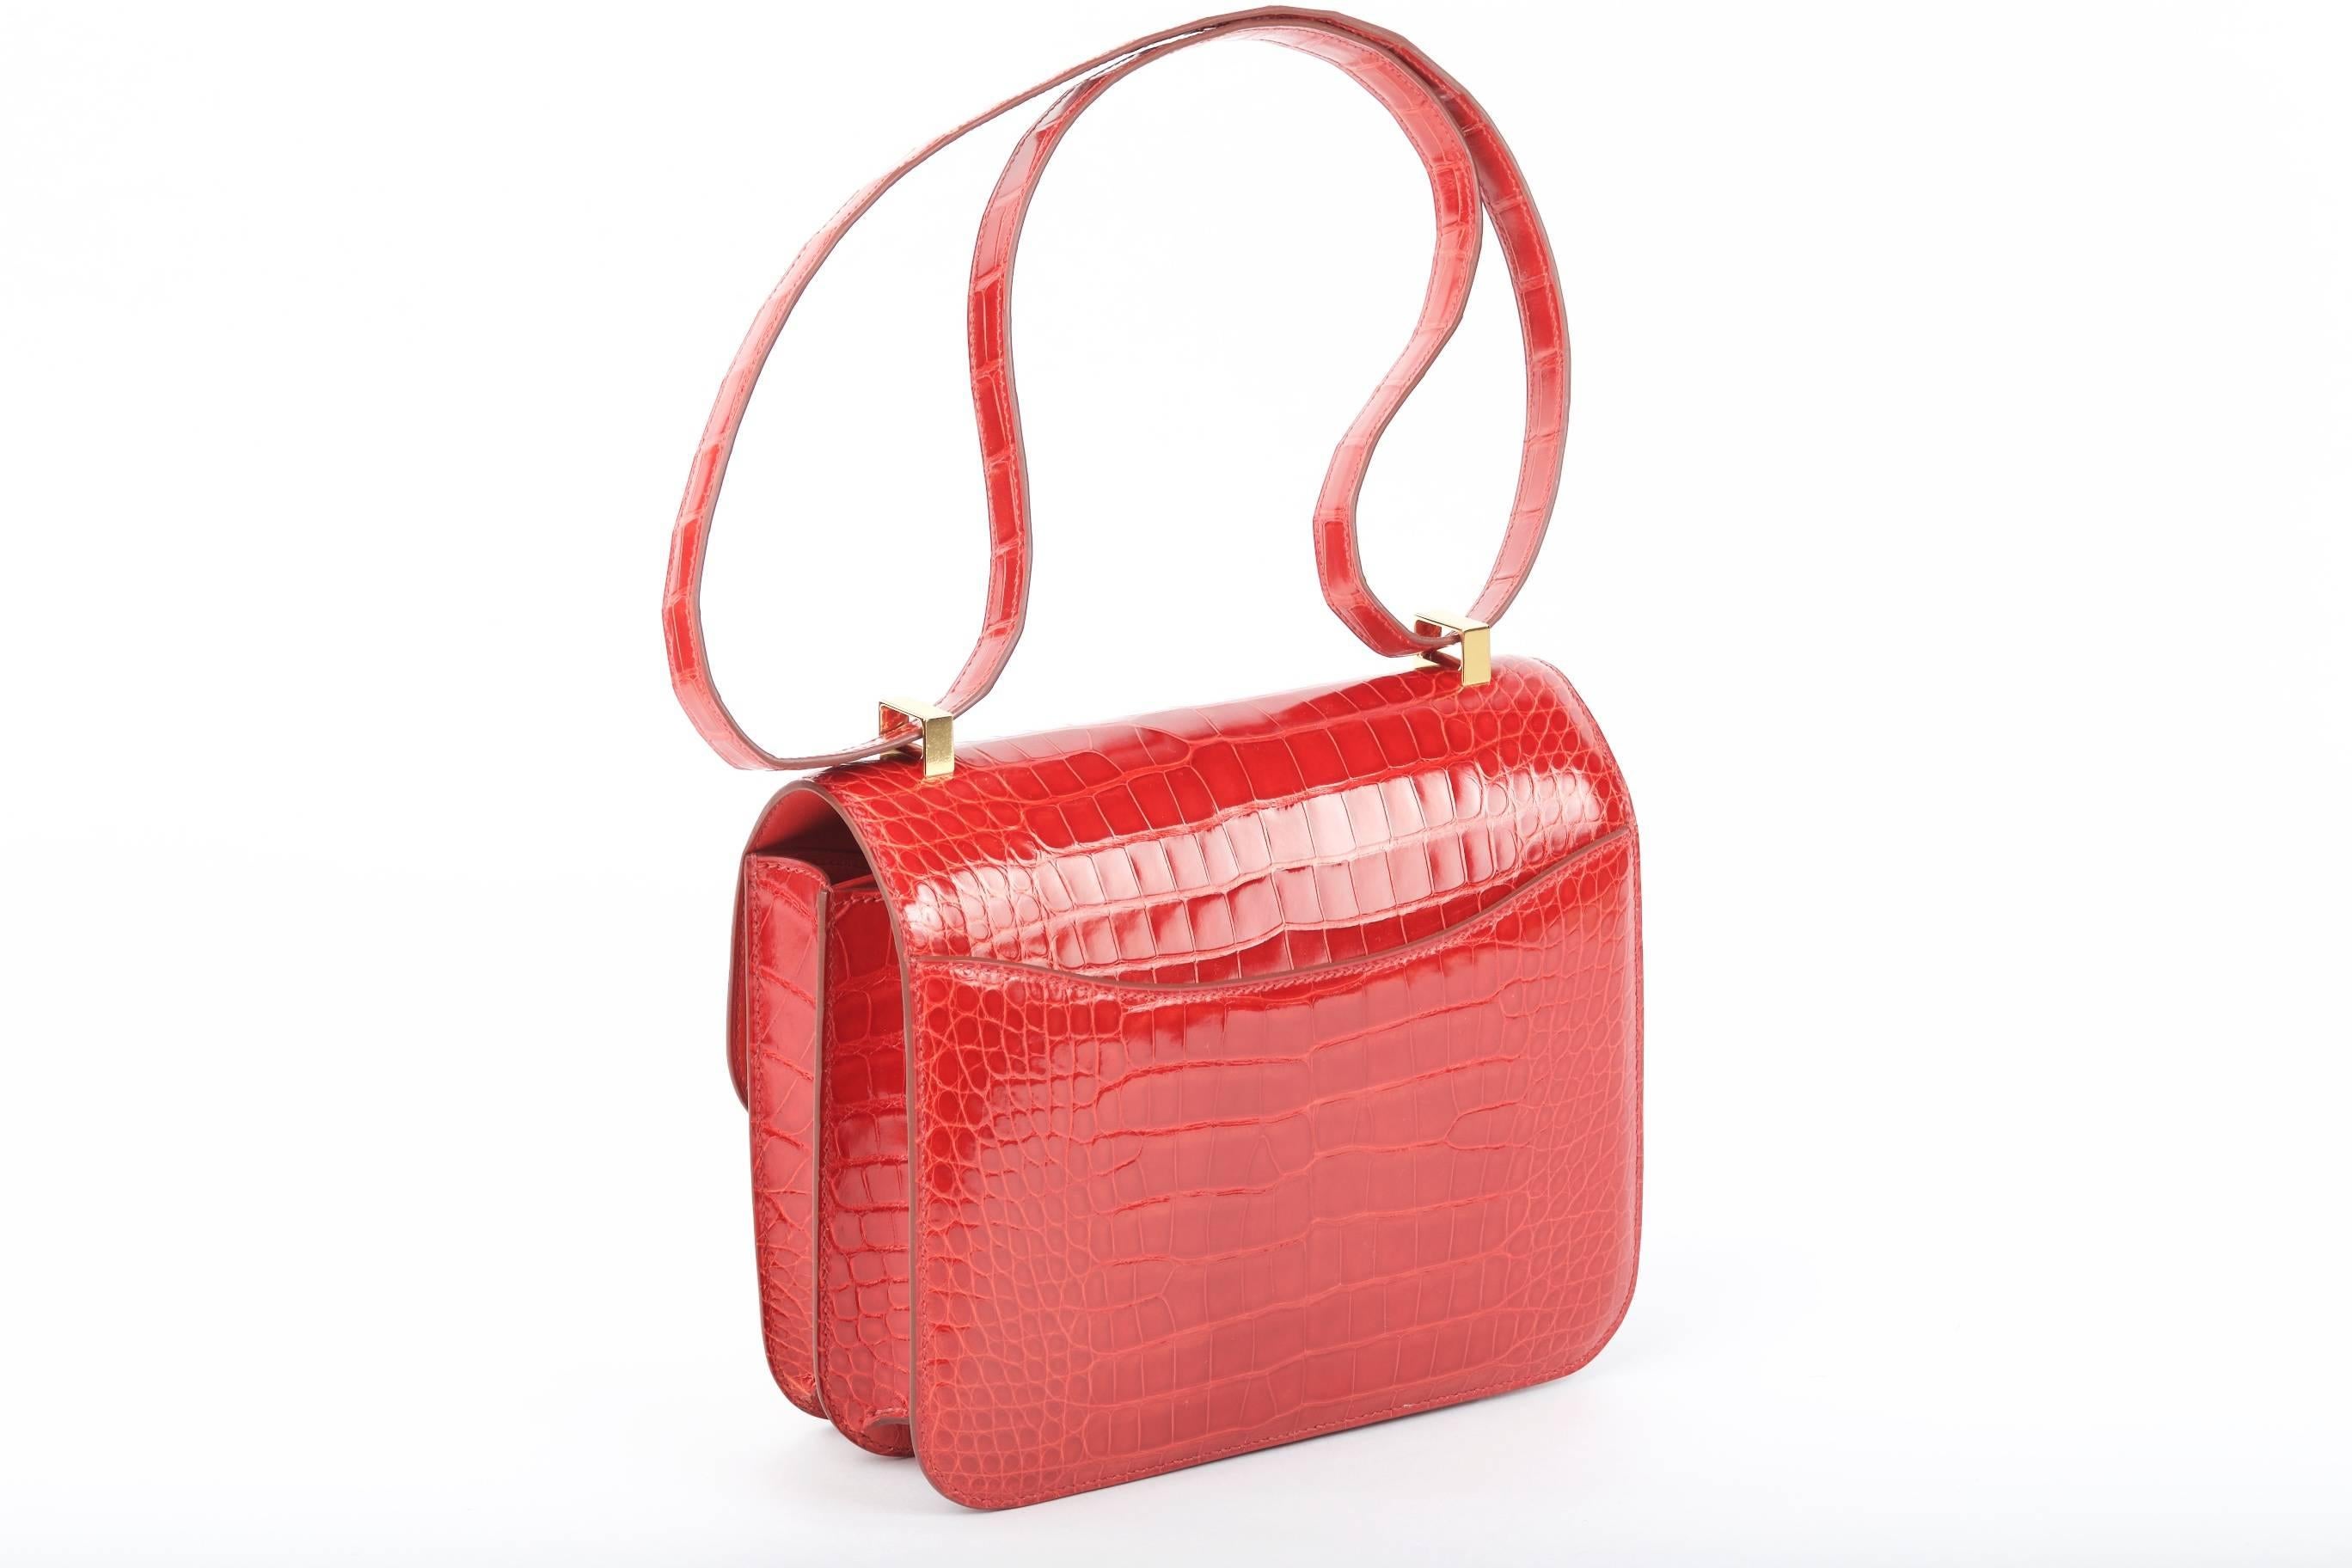 New Condition

Hermes Constance in a perfect super rare size 24cm! Incredible Sanguine nilo crocodile with Gold hardware. Actually big enough for everyday use. Comfy double strap that is perfect to carry cross body or shoulder bag. The color will